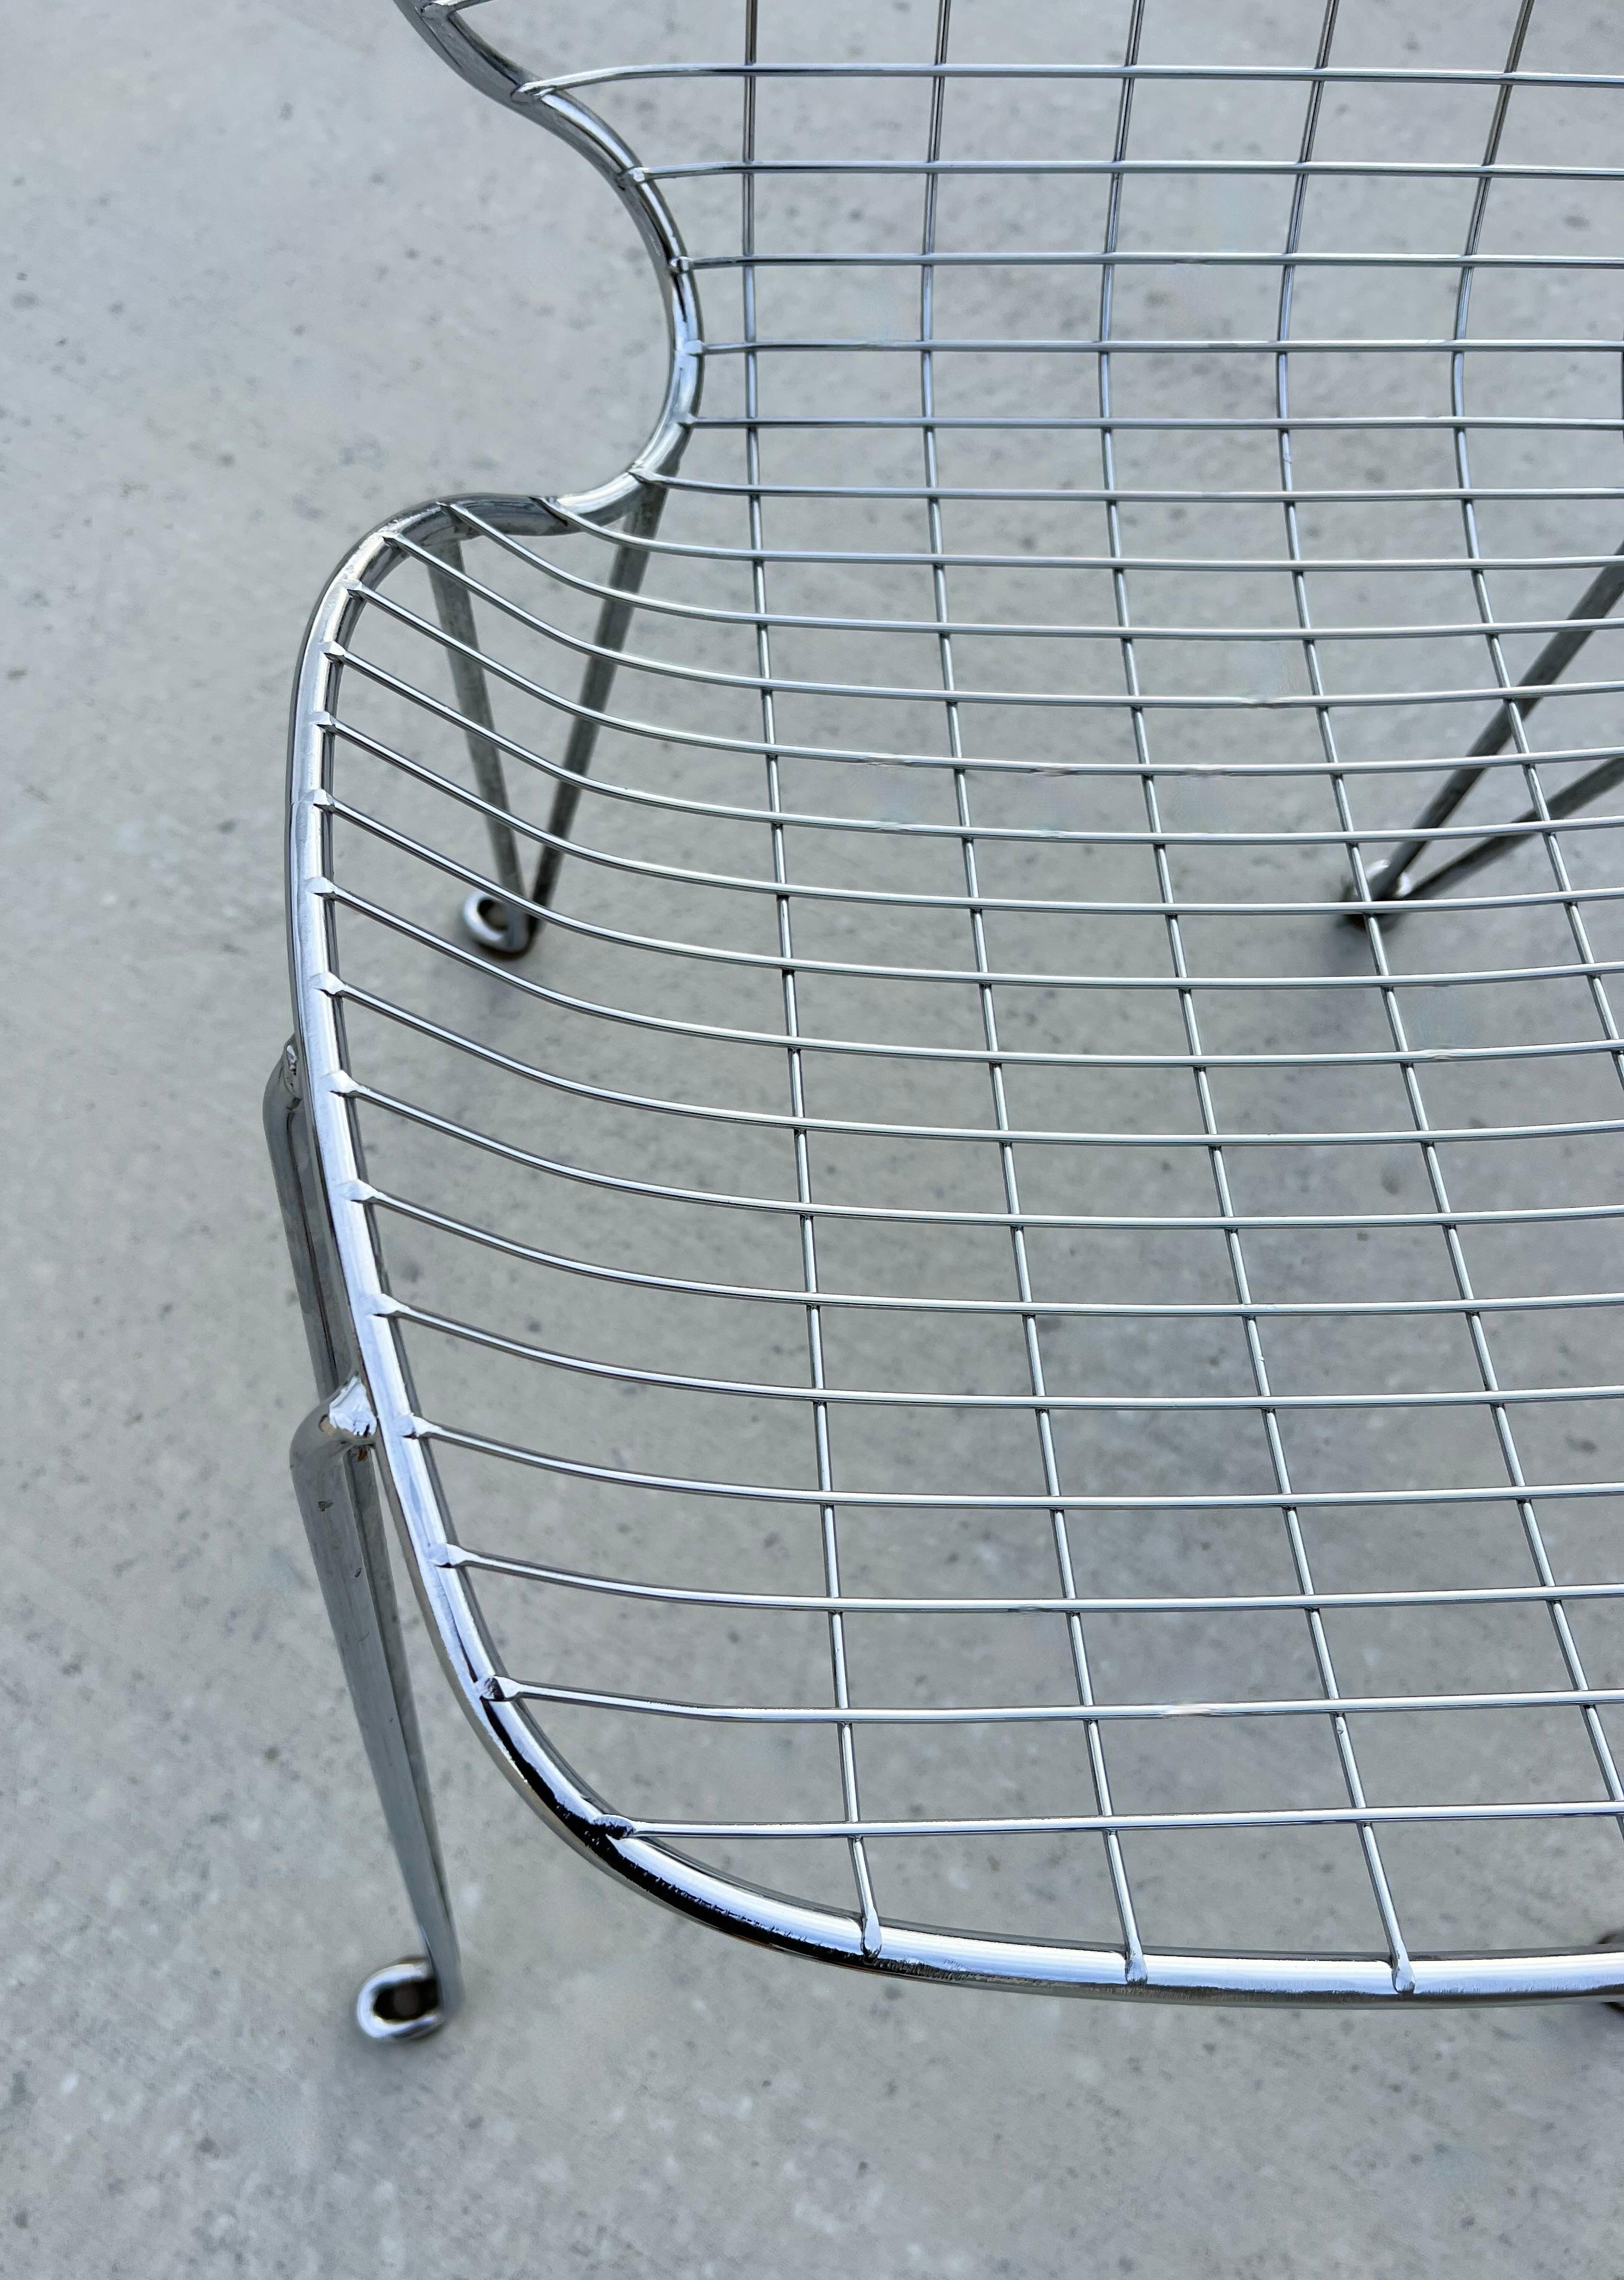 Vintage Metal Wire Chairs With Hairpin Legs - Set of Four For Sale 2